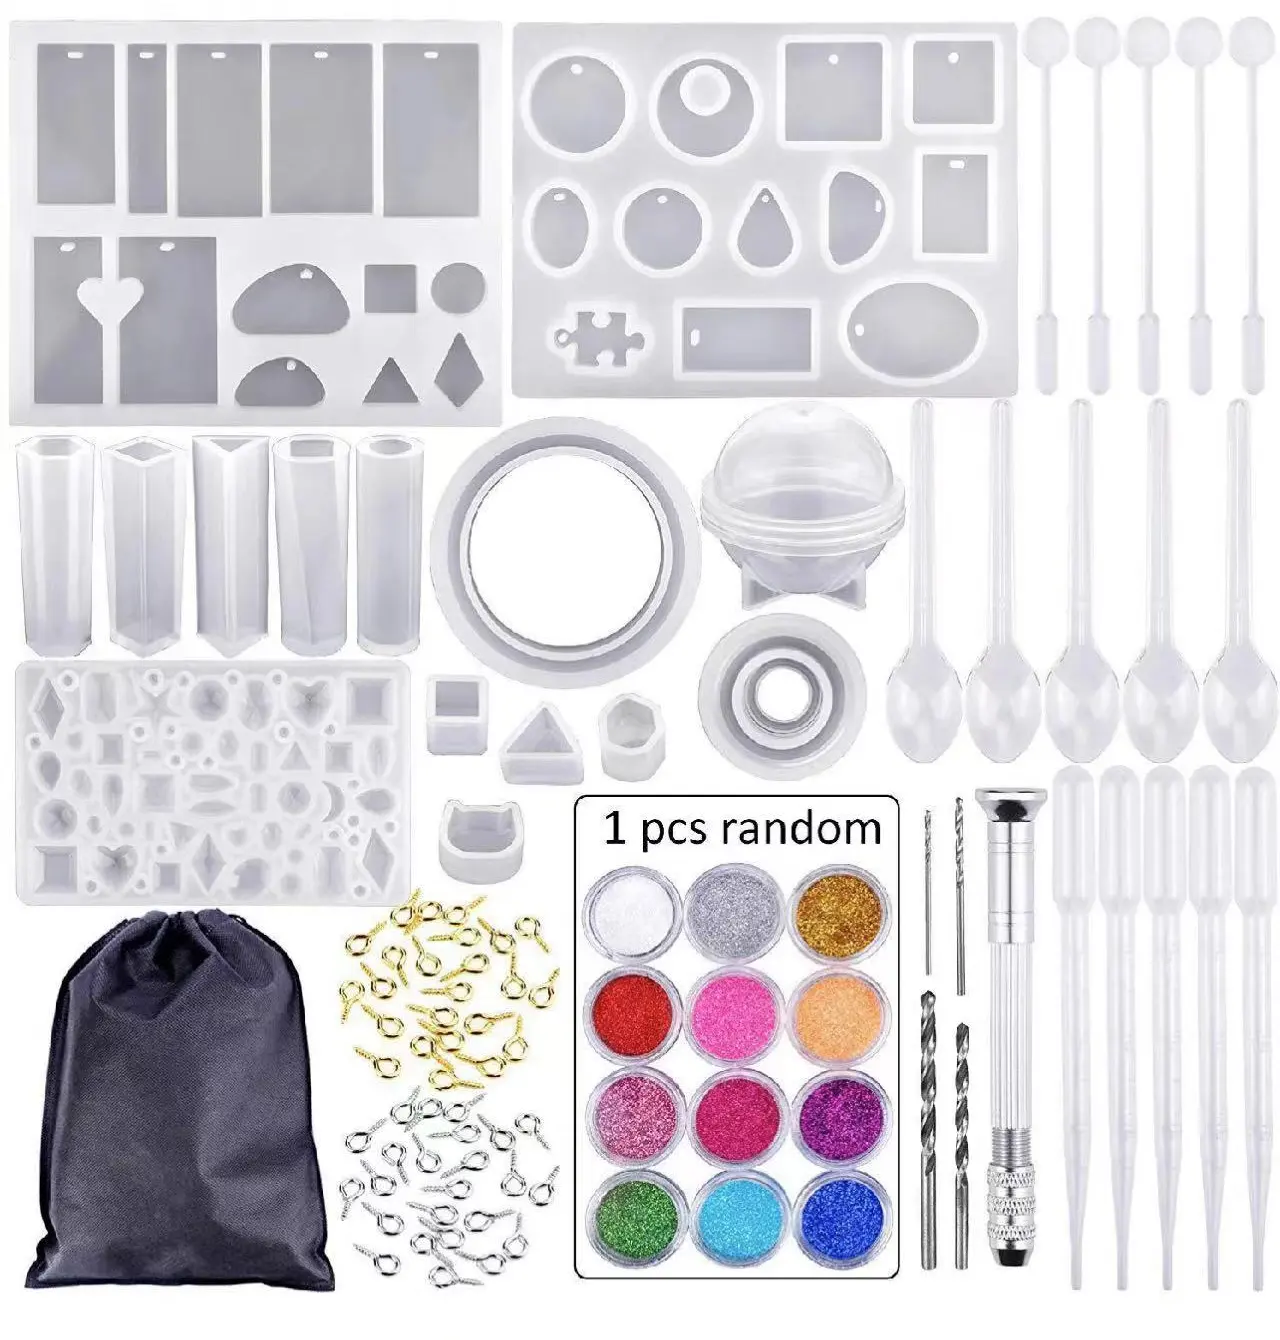 163 PCS hot sale resin mold set for decoration crystal pendant necklace Jewelry Silicone Mold kit